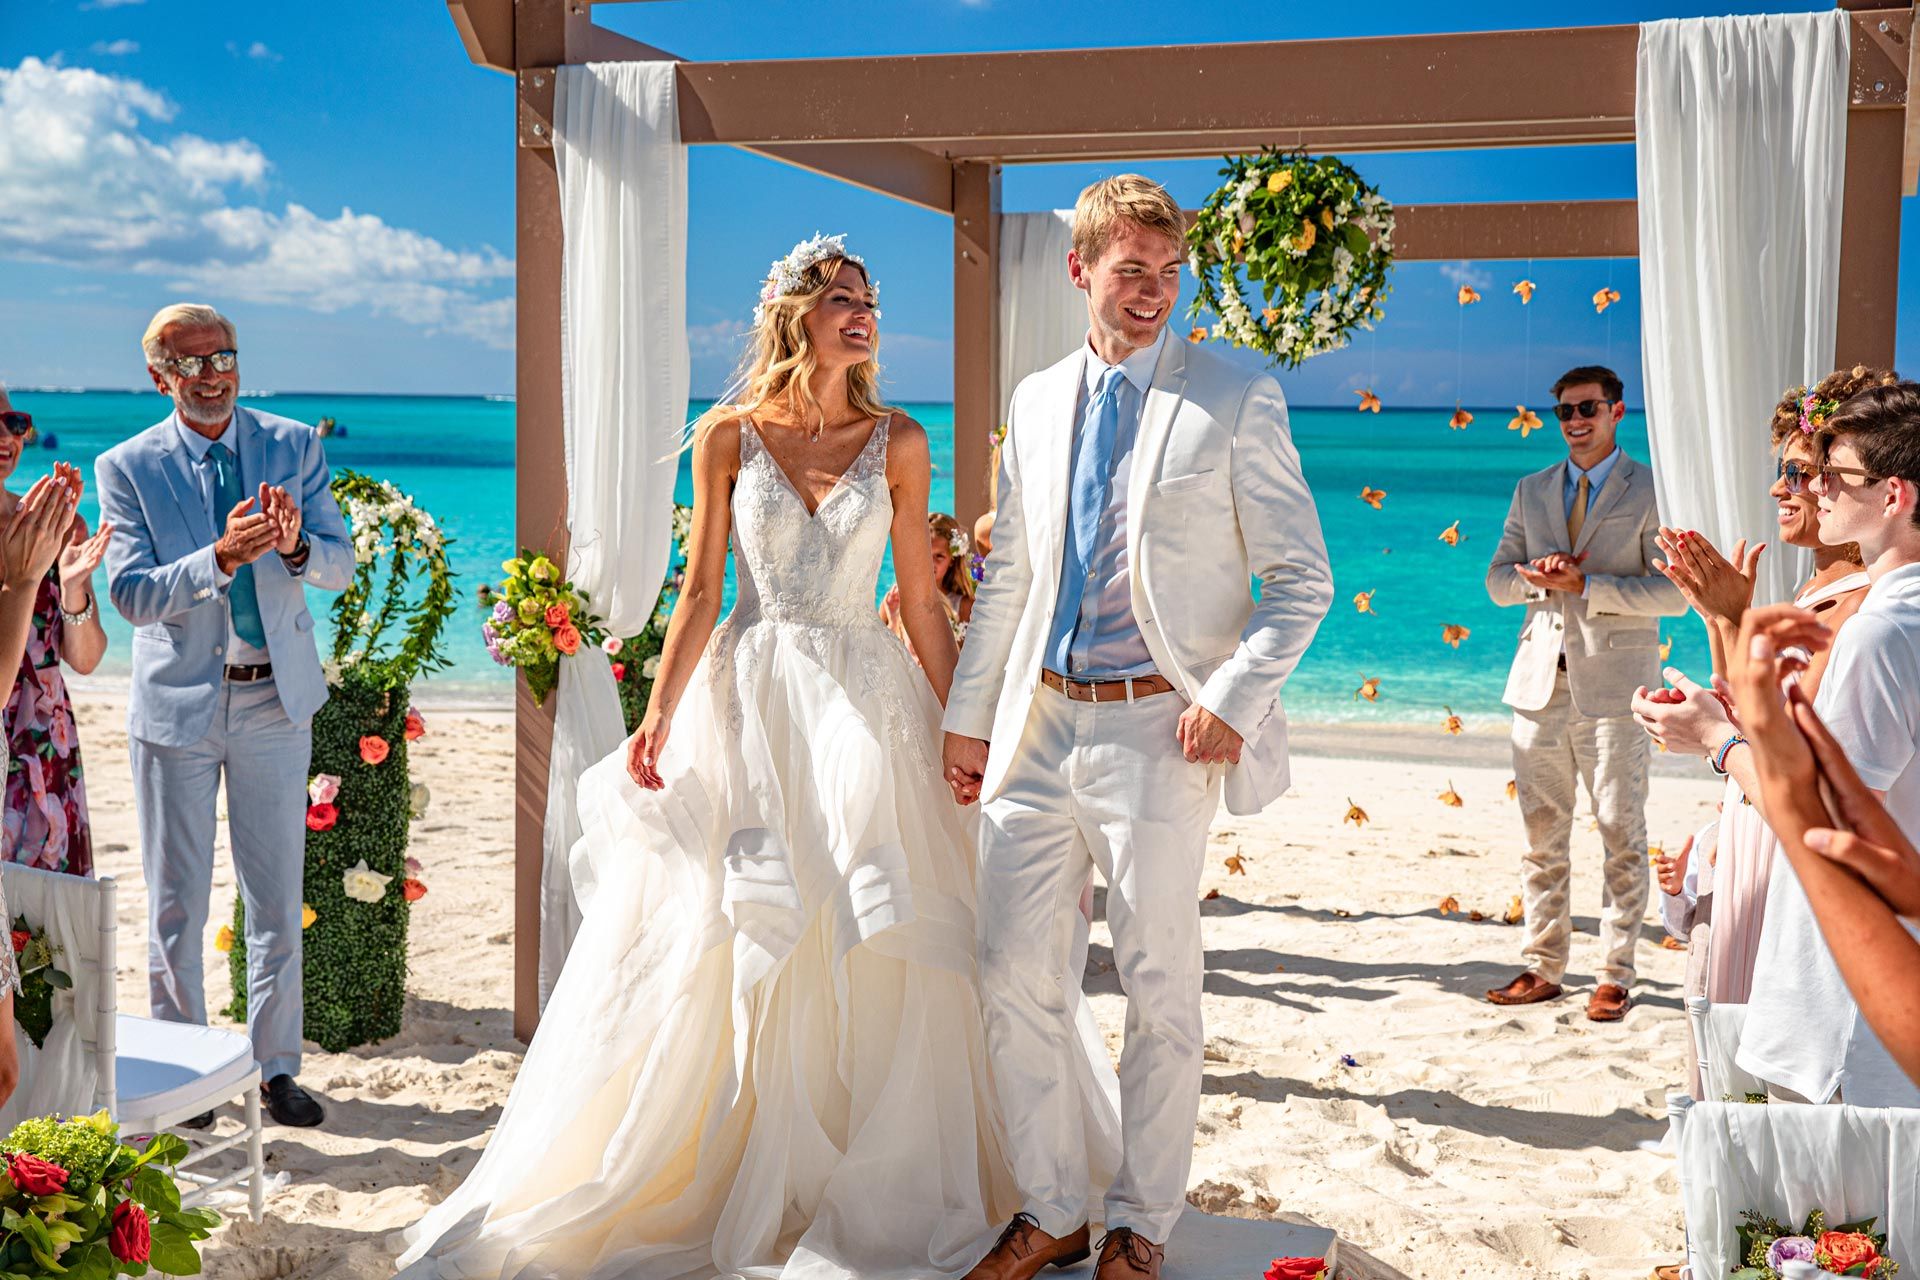 How to Plan a Destination Wedding in 12 Steps